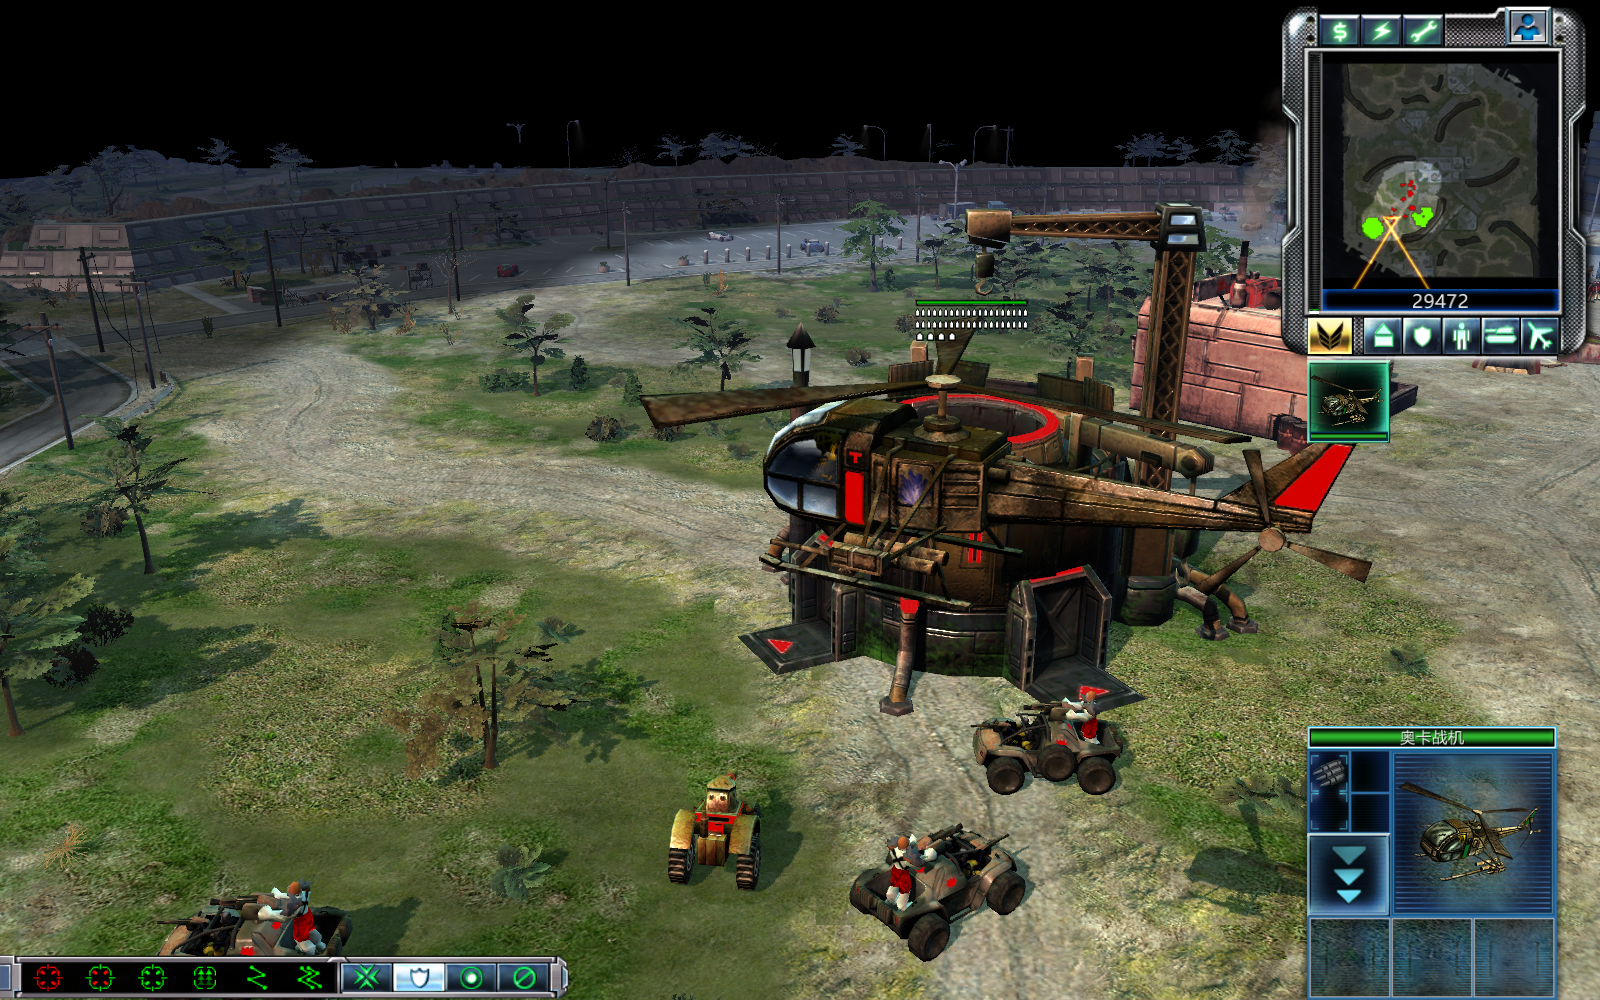 command and conquer 3 kanes wrath tutorial